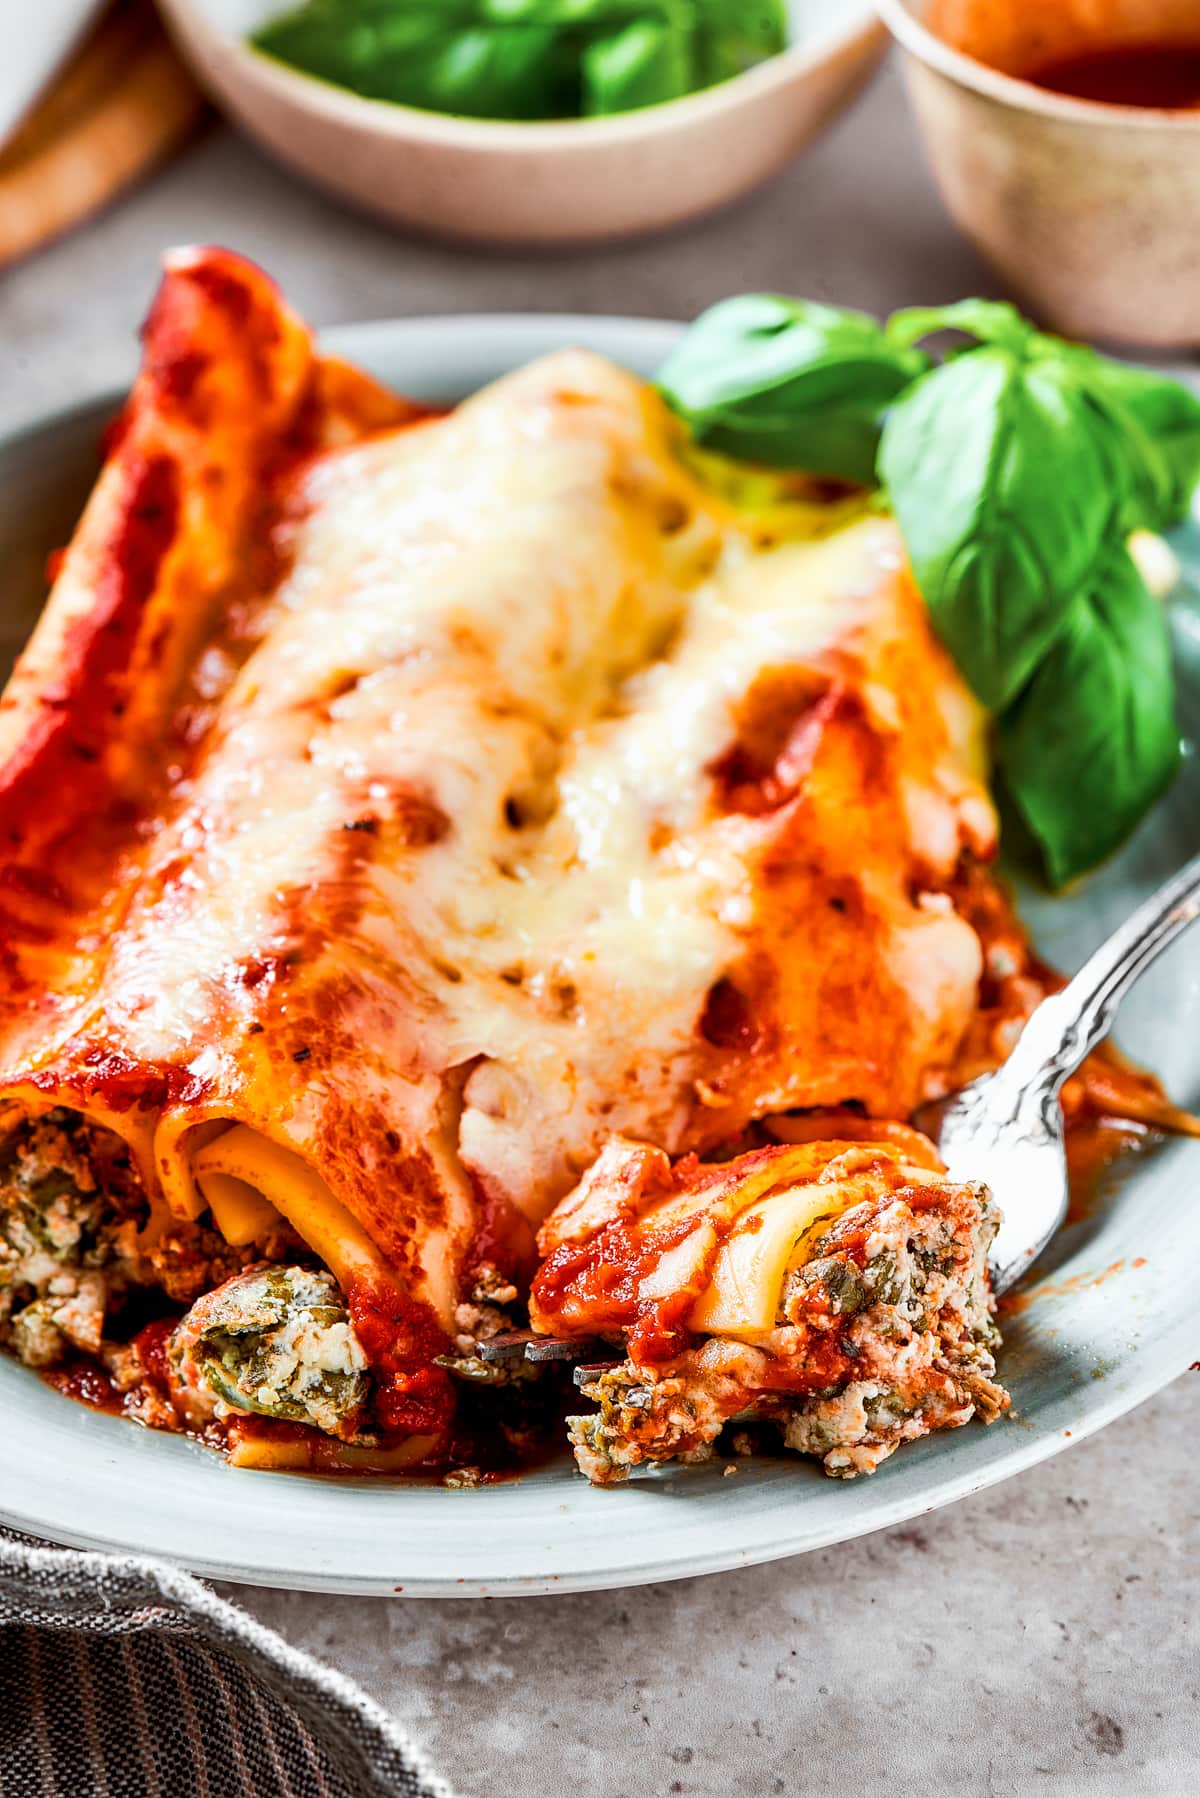 Stuffed manicotti served on a dinner plate with a fork breaking off a bite.